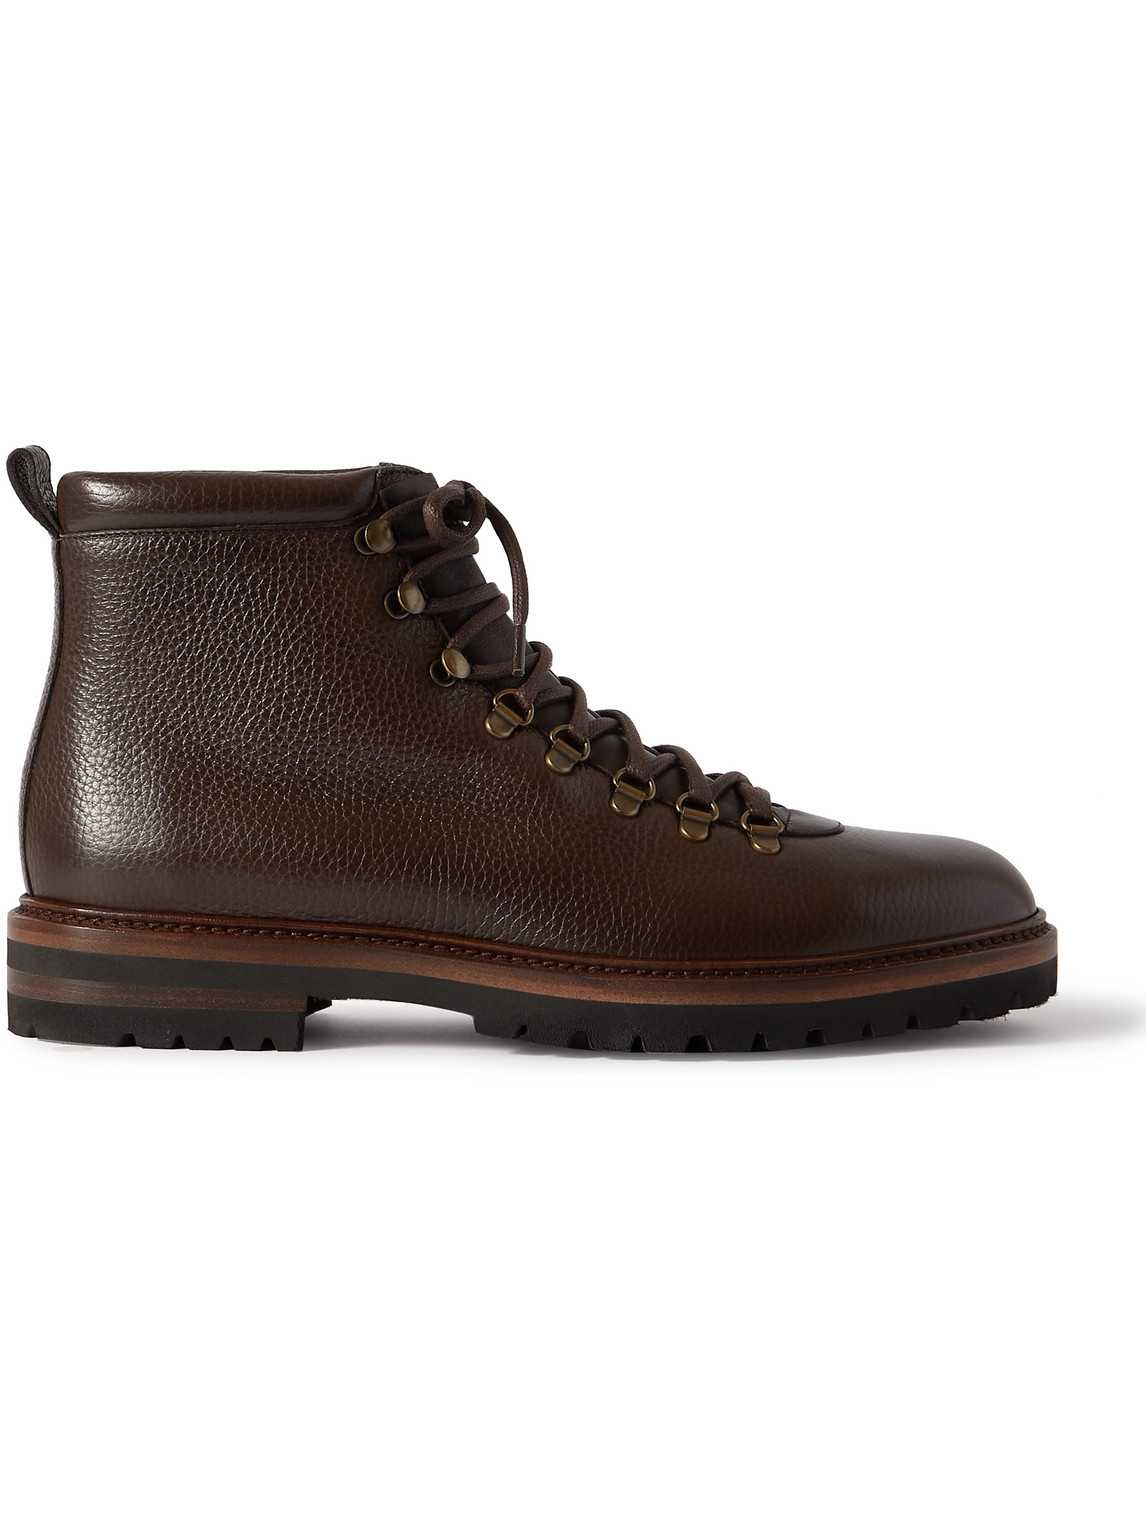 Calaurio Full-Grain Leather Lace-Up Boots